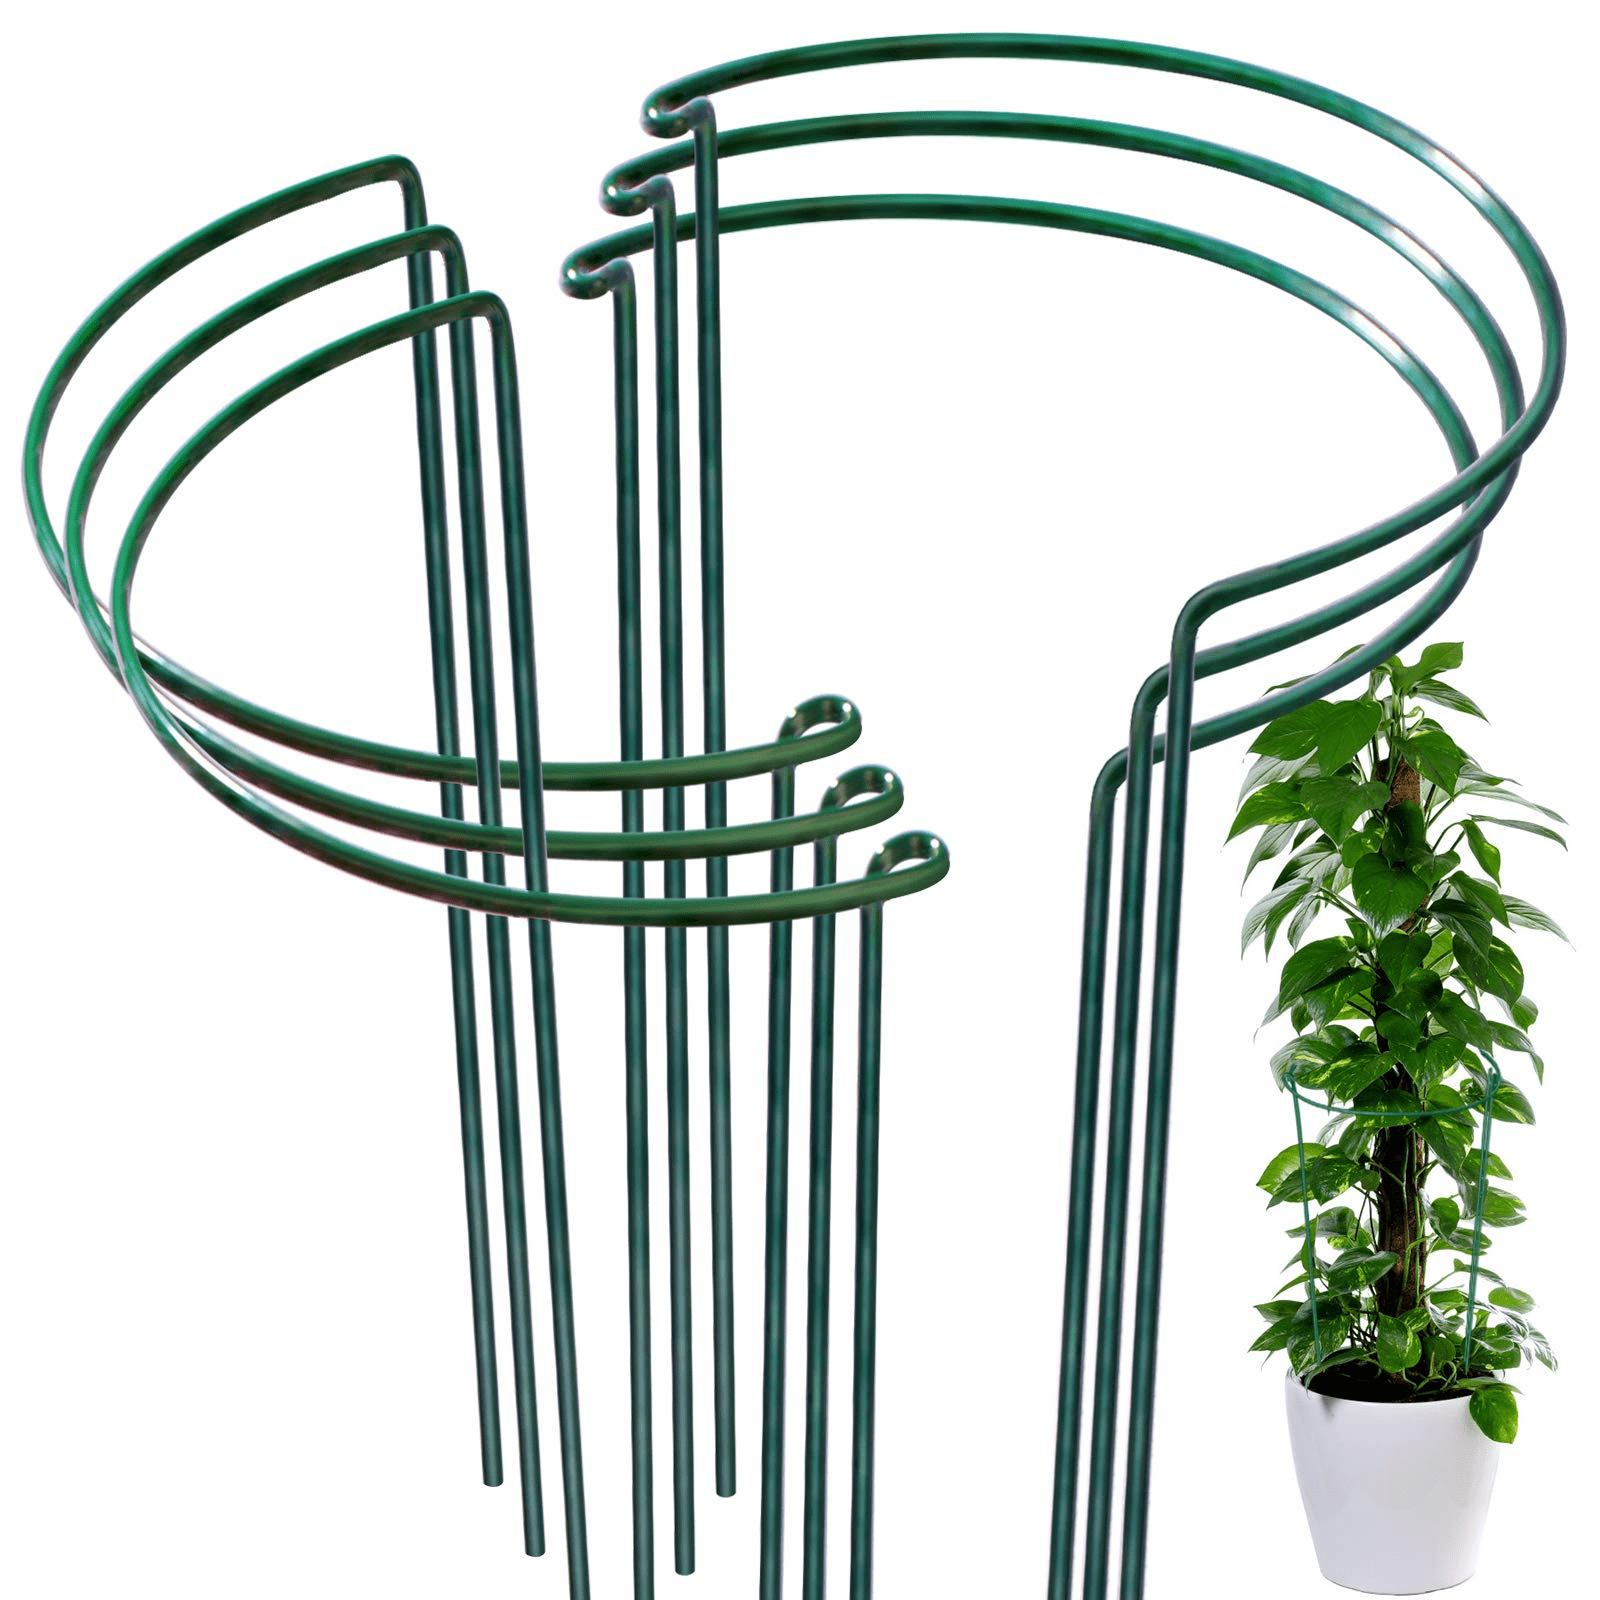 8pcs Metal Plant Supports Kit Stake Half Round Garden Plant Flower Support Set 